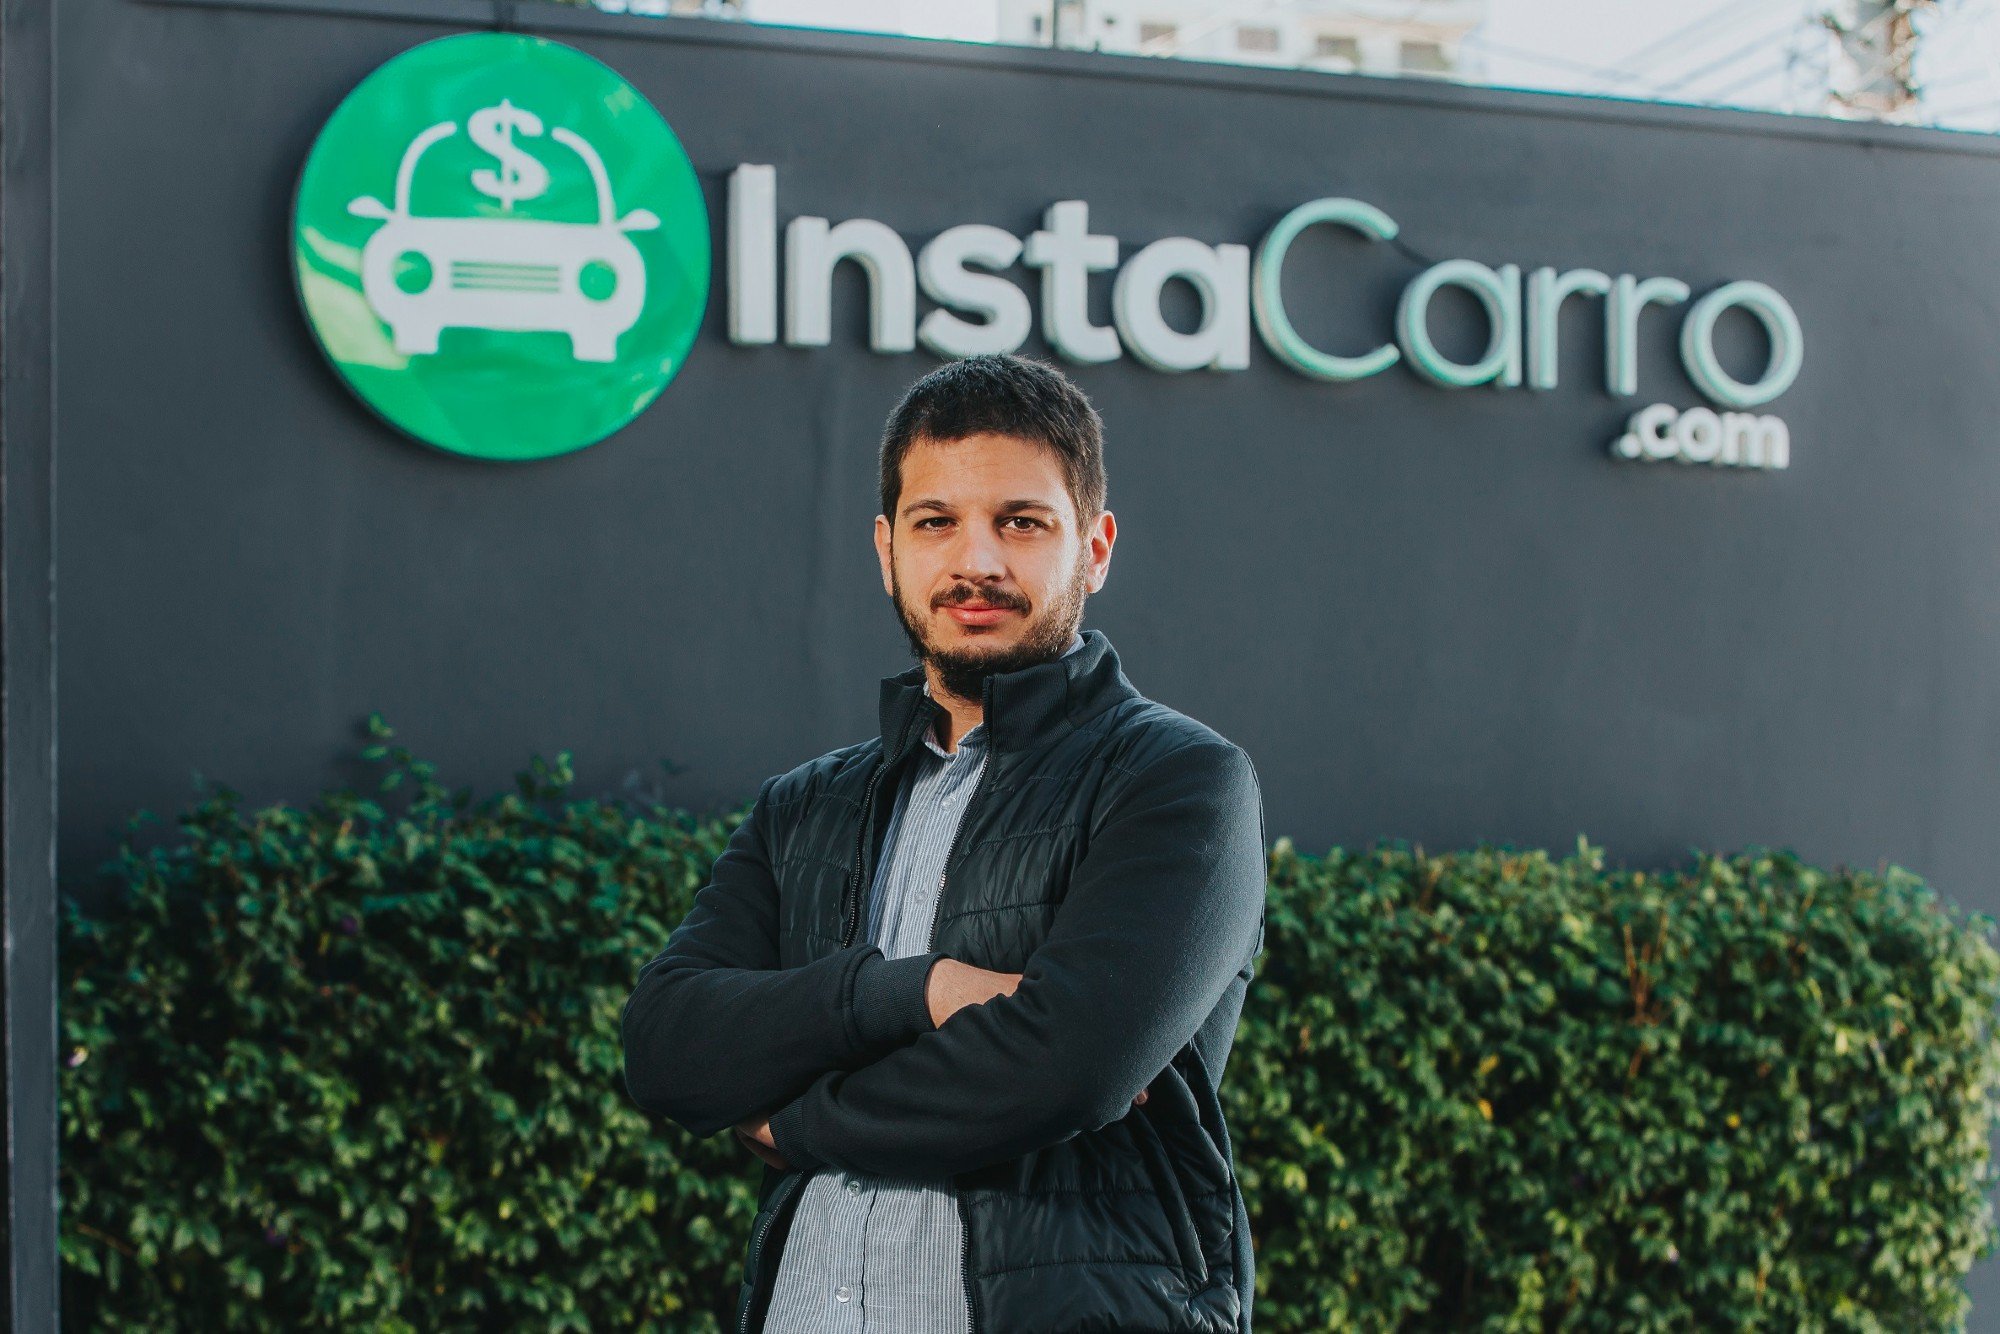 InstaCarro was founded in 2015 by Argentine entrepreneur Luca Cafici in the city of São Paulo